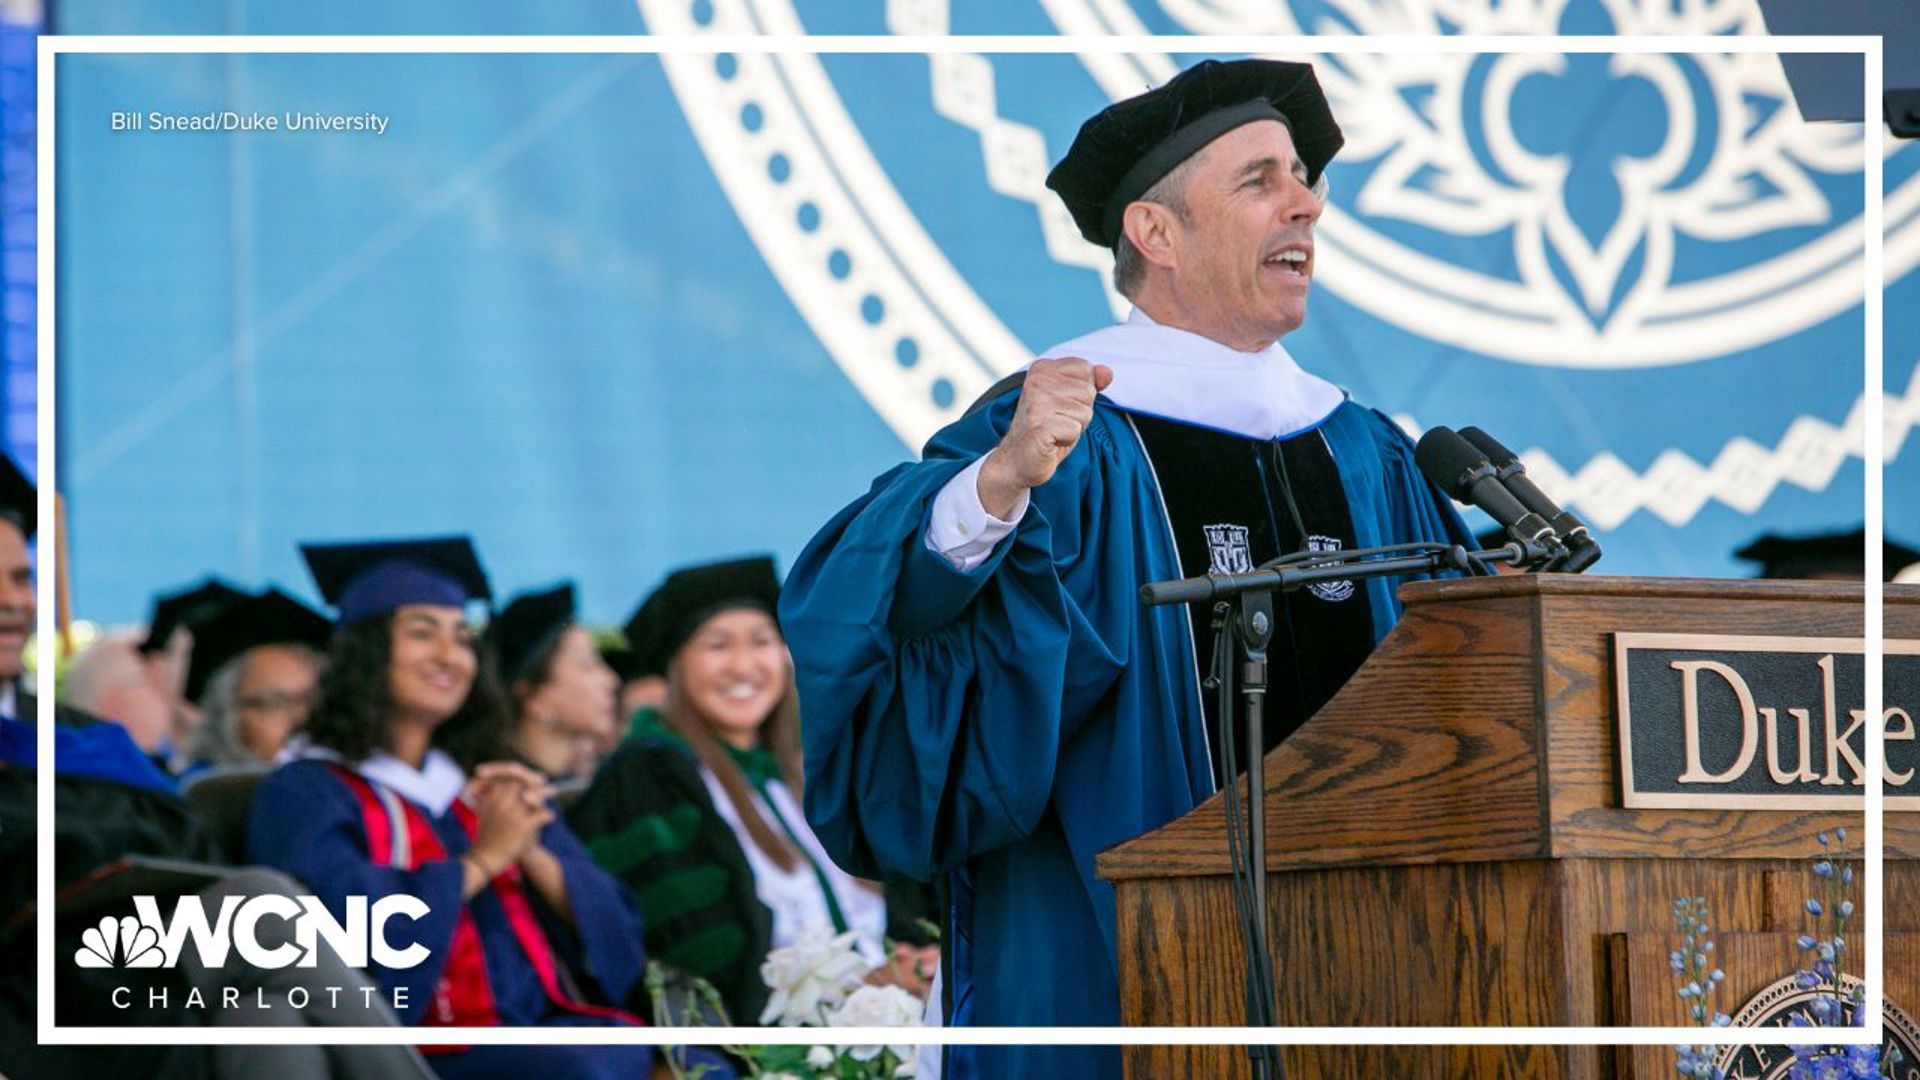 Dozens of people walked out at Duke University's commencement ceremony in protest of guest speaker Jerry Seinfeld.